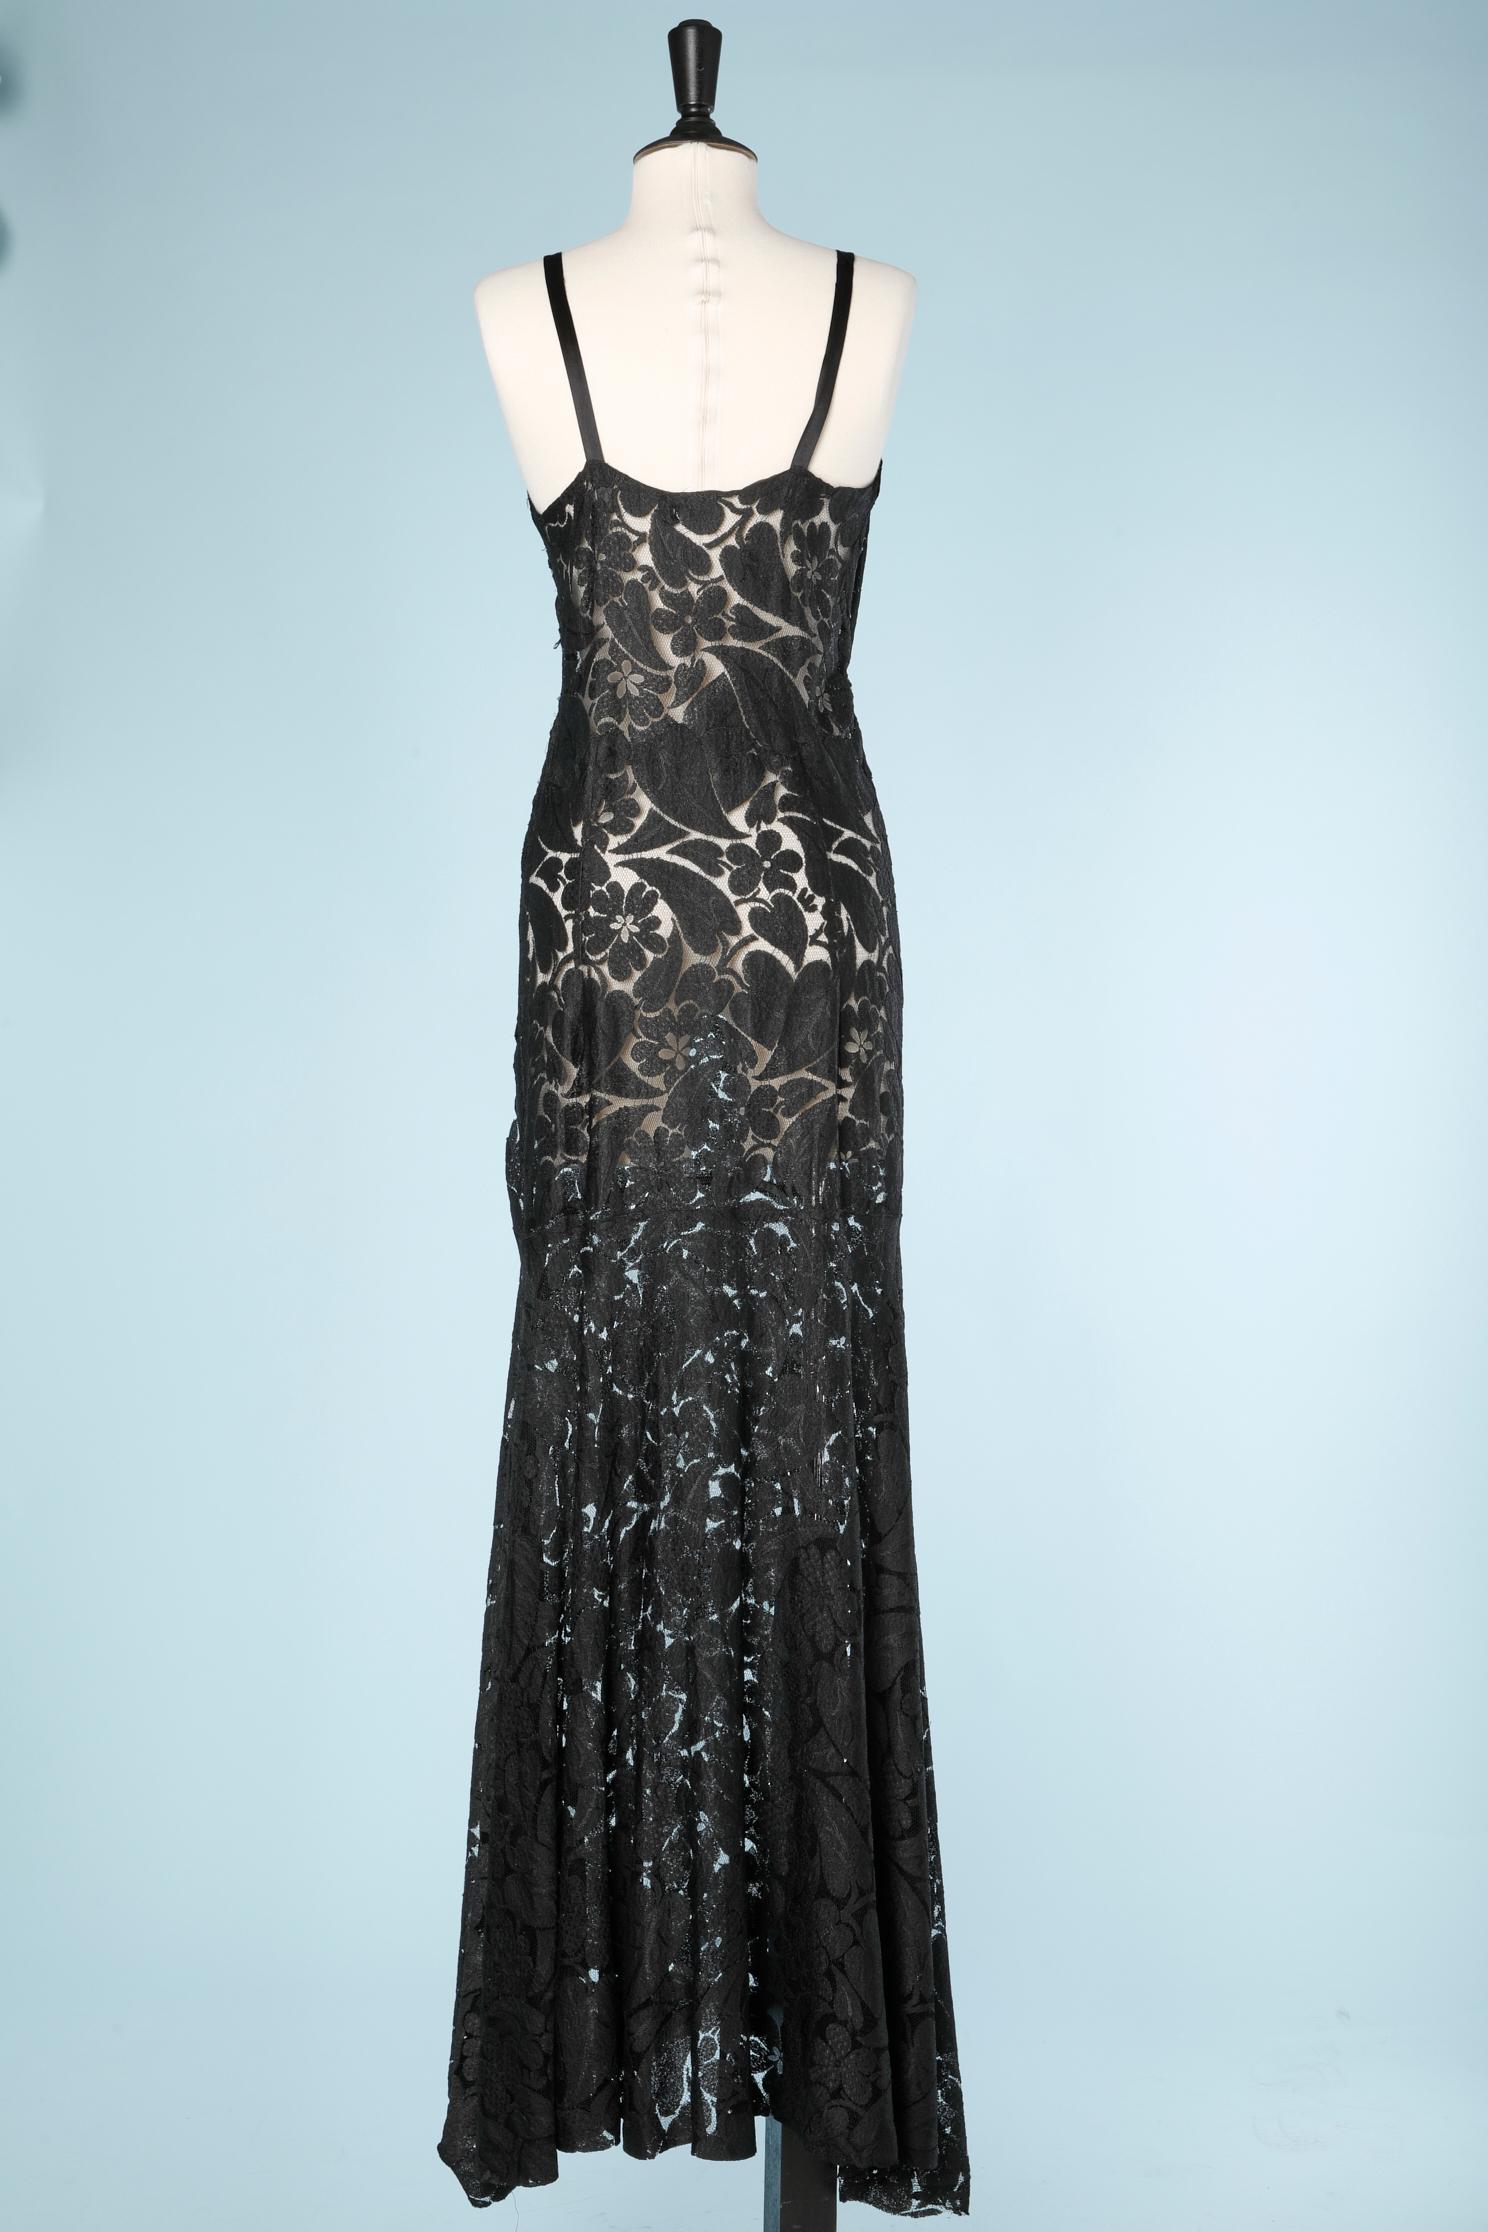 Black Long evening gown in black see-through lace 1930